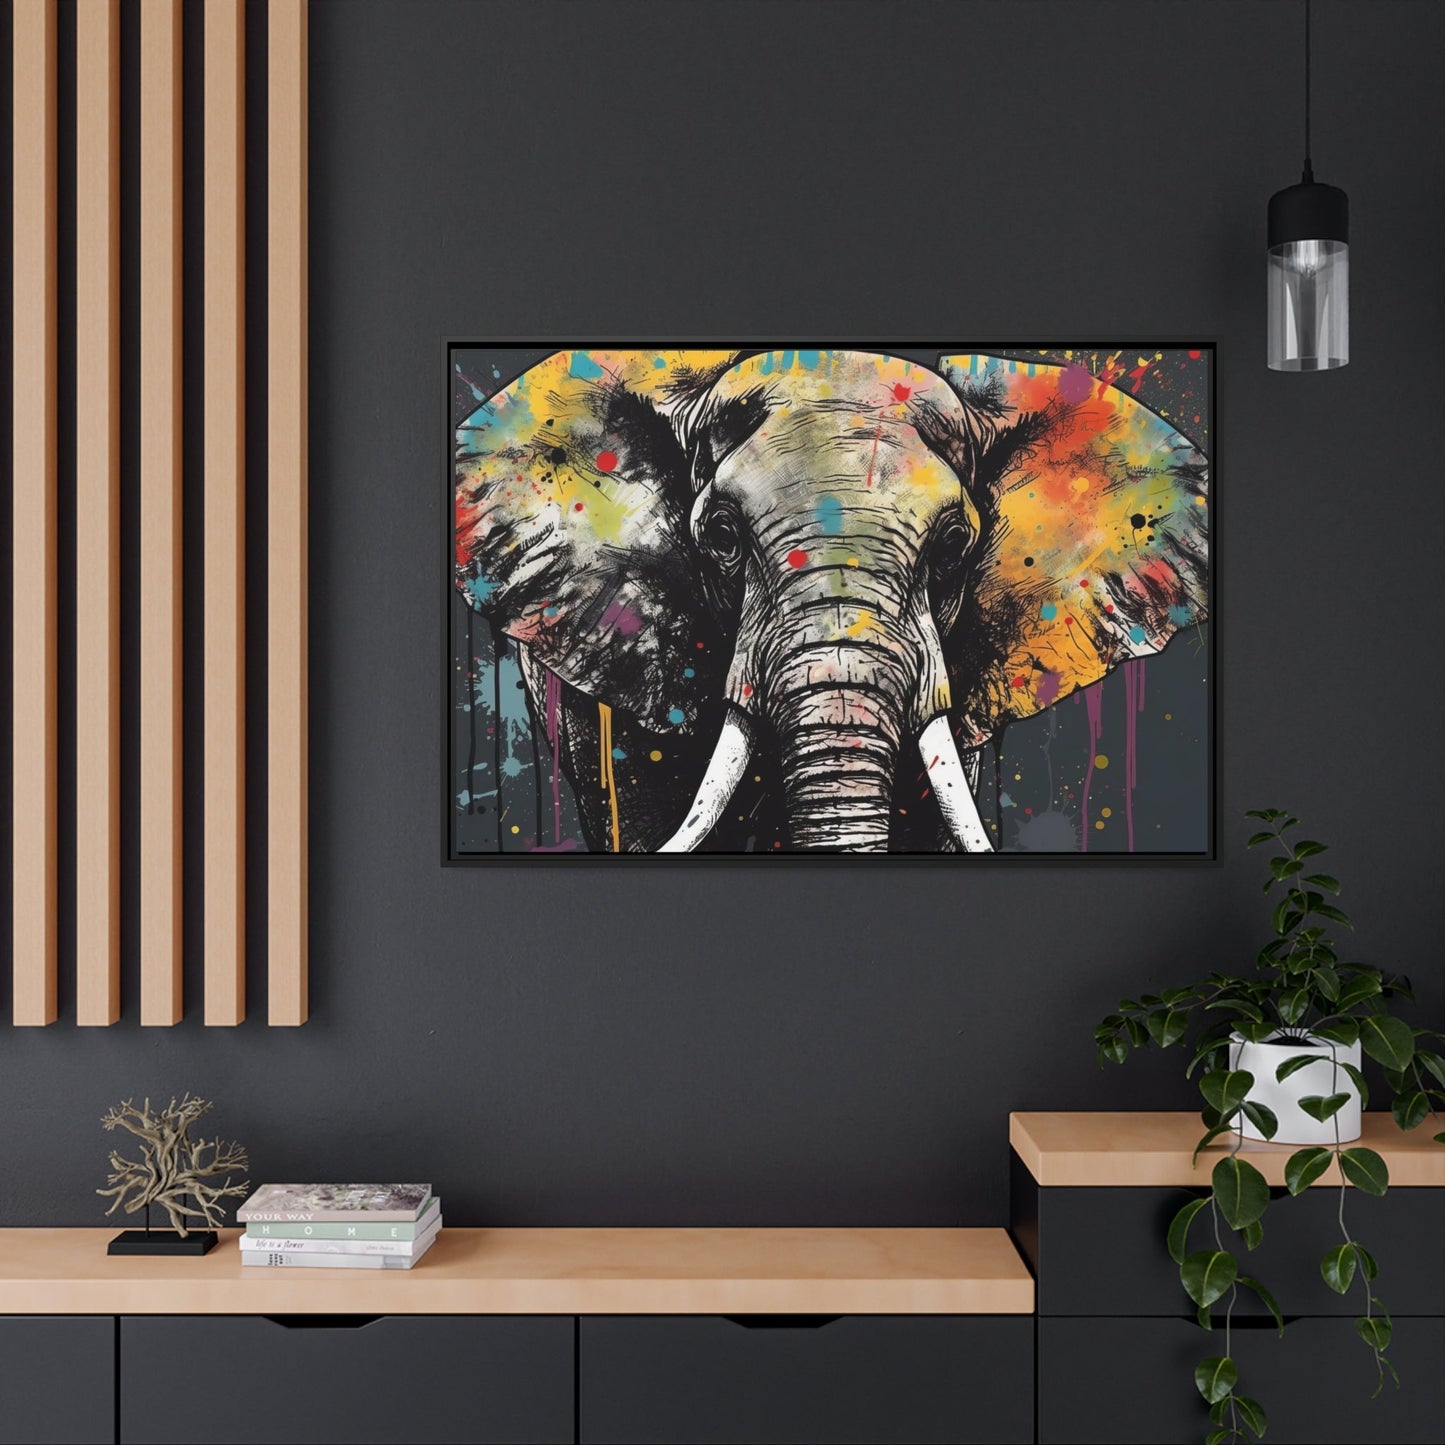 The Graceful Giant: Framed Poster Featuring an Elegant Elephant